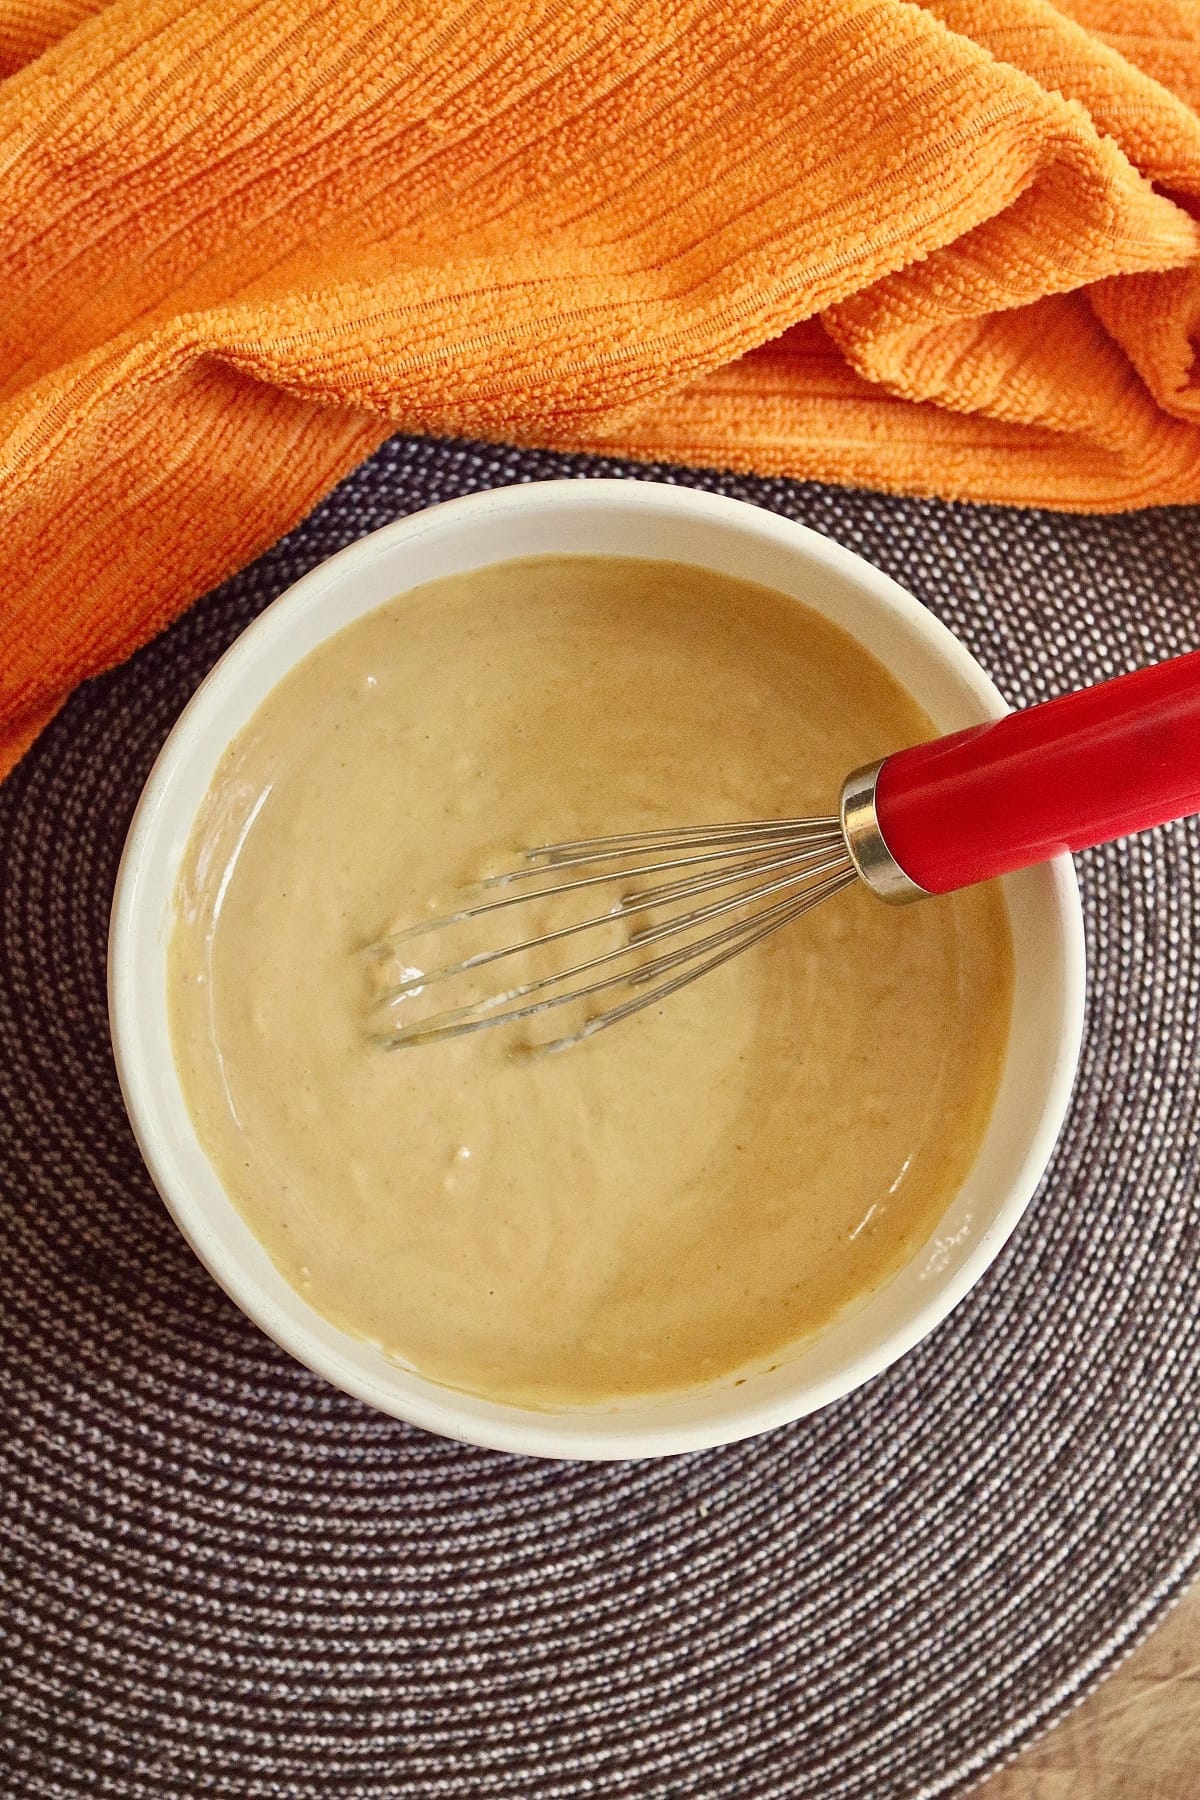 peanut sauce whisked together in a bowl